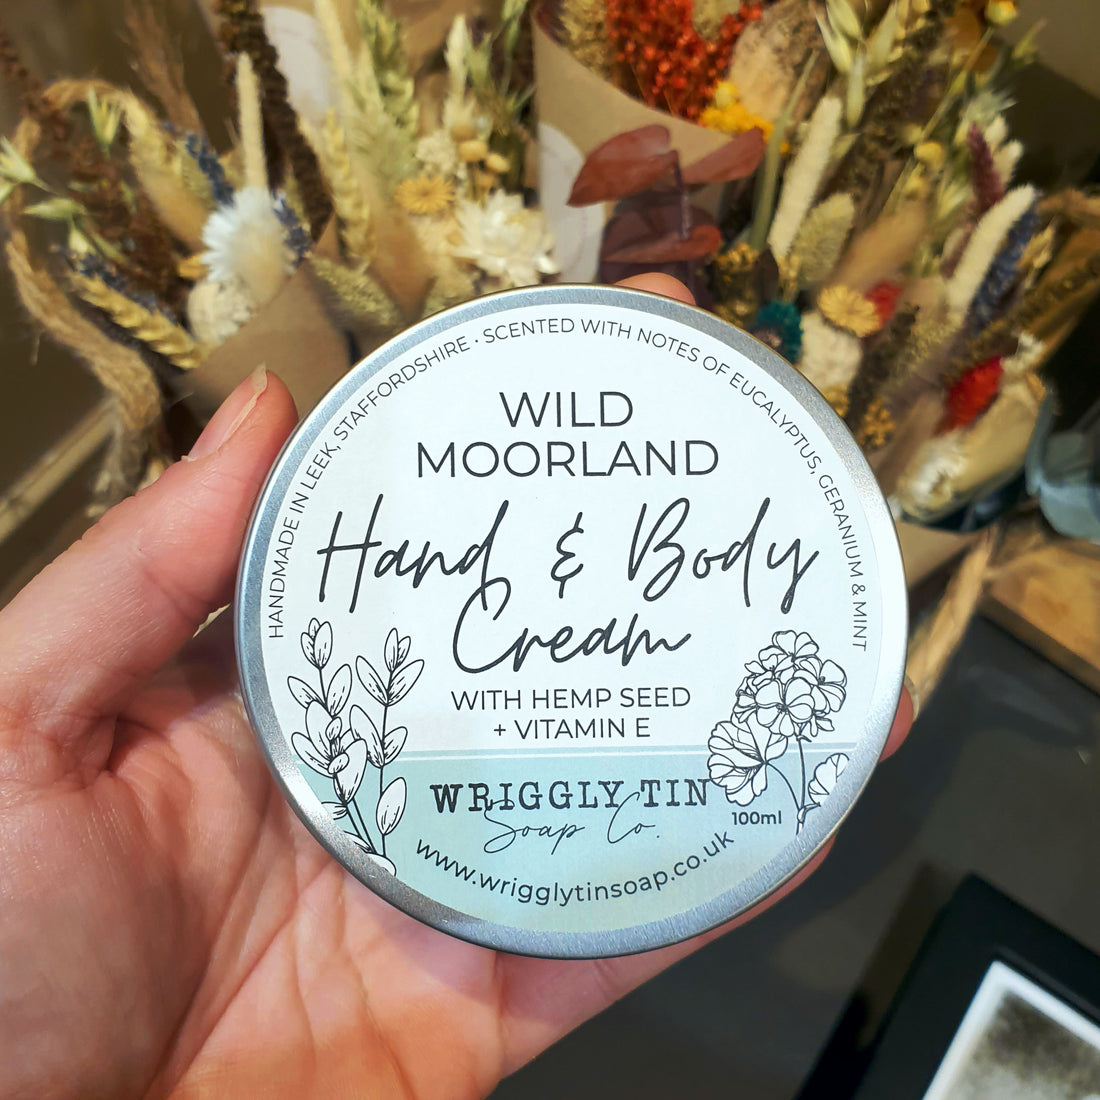 Wriggly Tin Soap Co. Hand and Body Cream